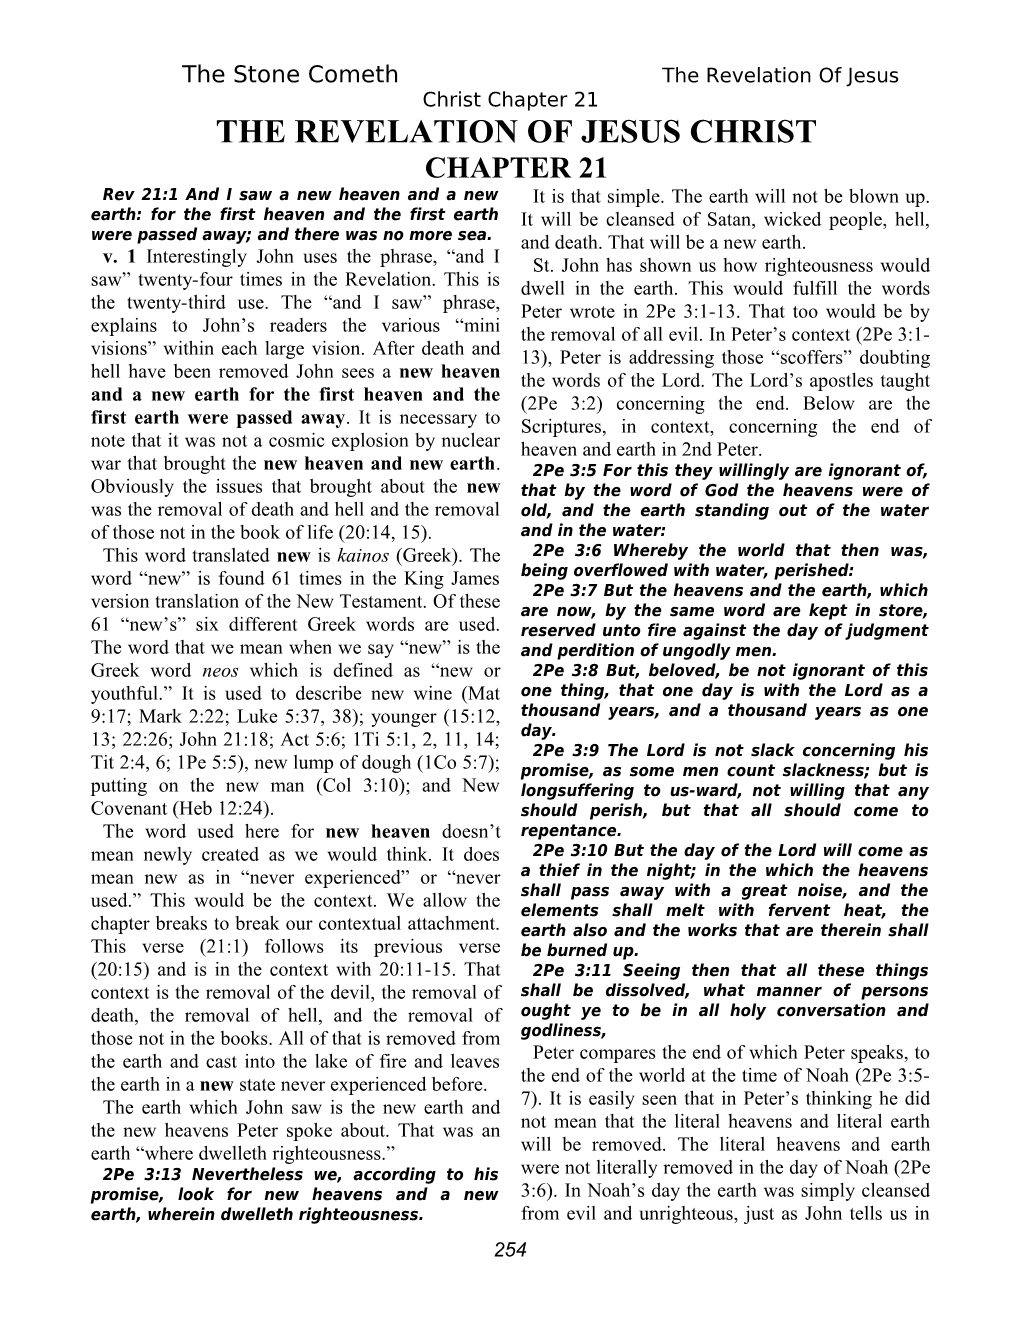 The Stone Cometh the Revelation of Jesus Christ Chapter 21